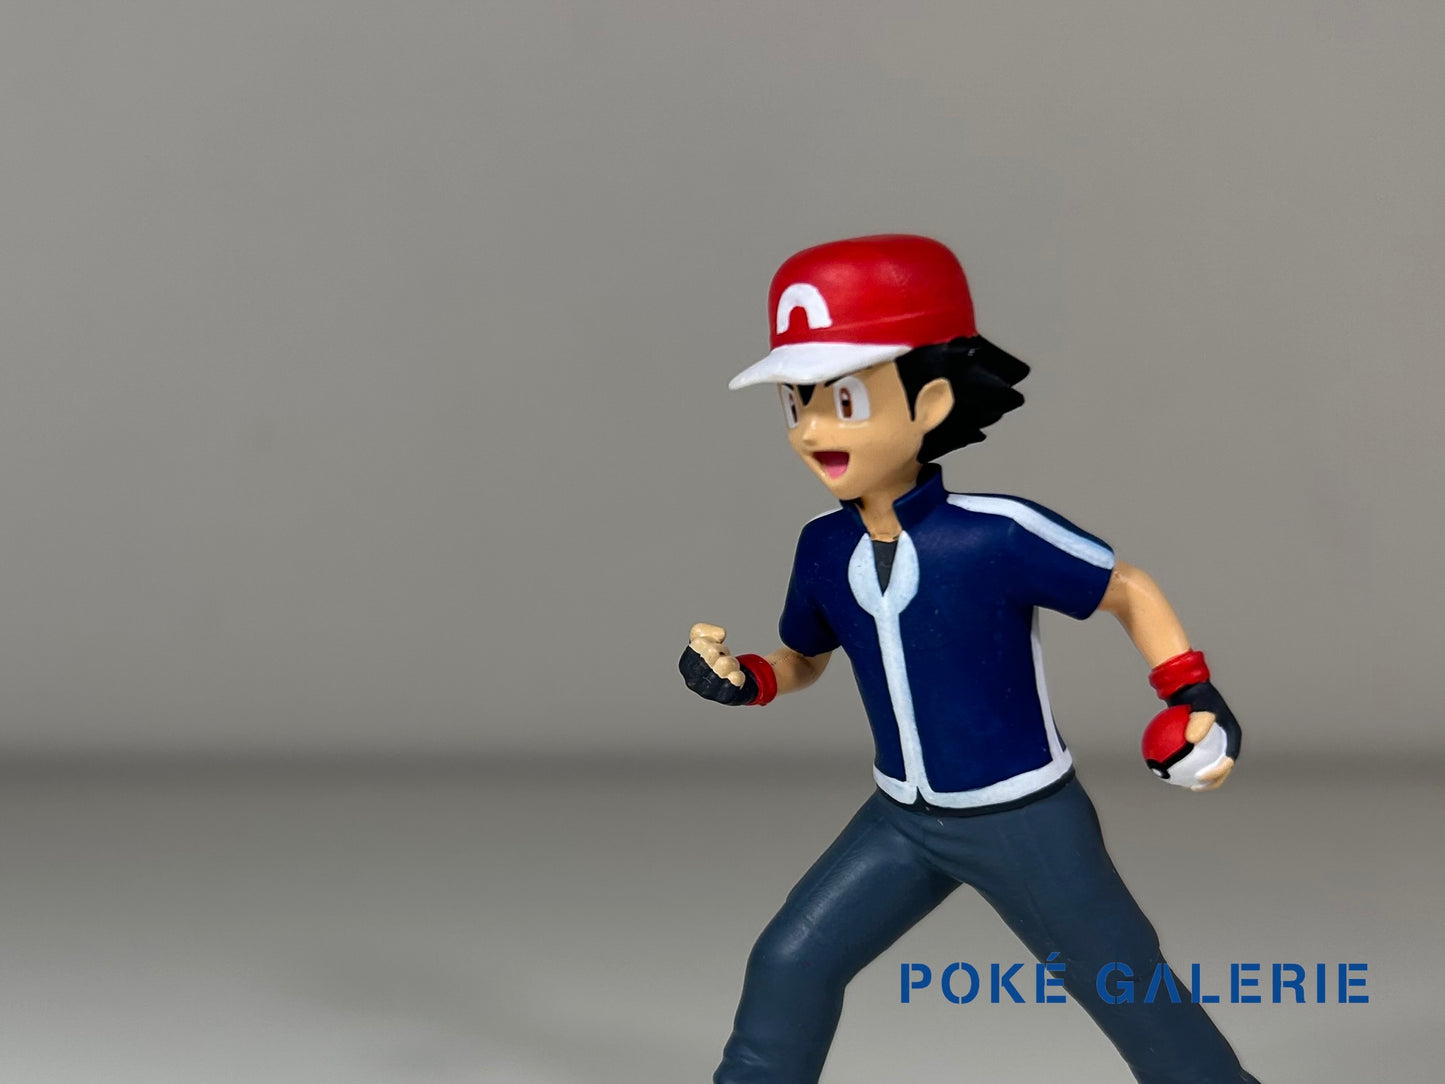 [IN STOCK] 1/20 Scale World Figure [LYTX] - Ash Ketchum